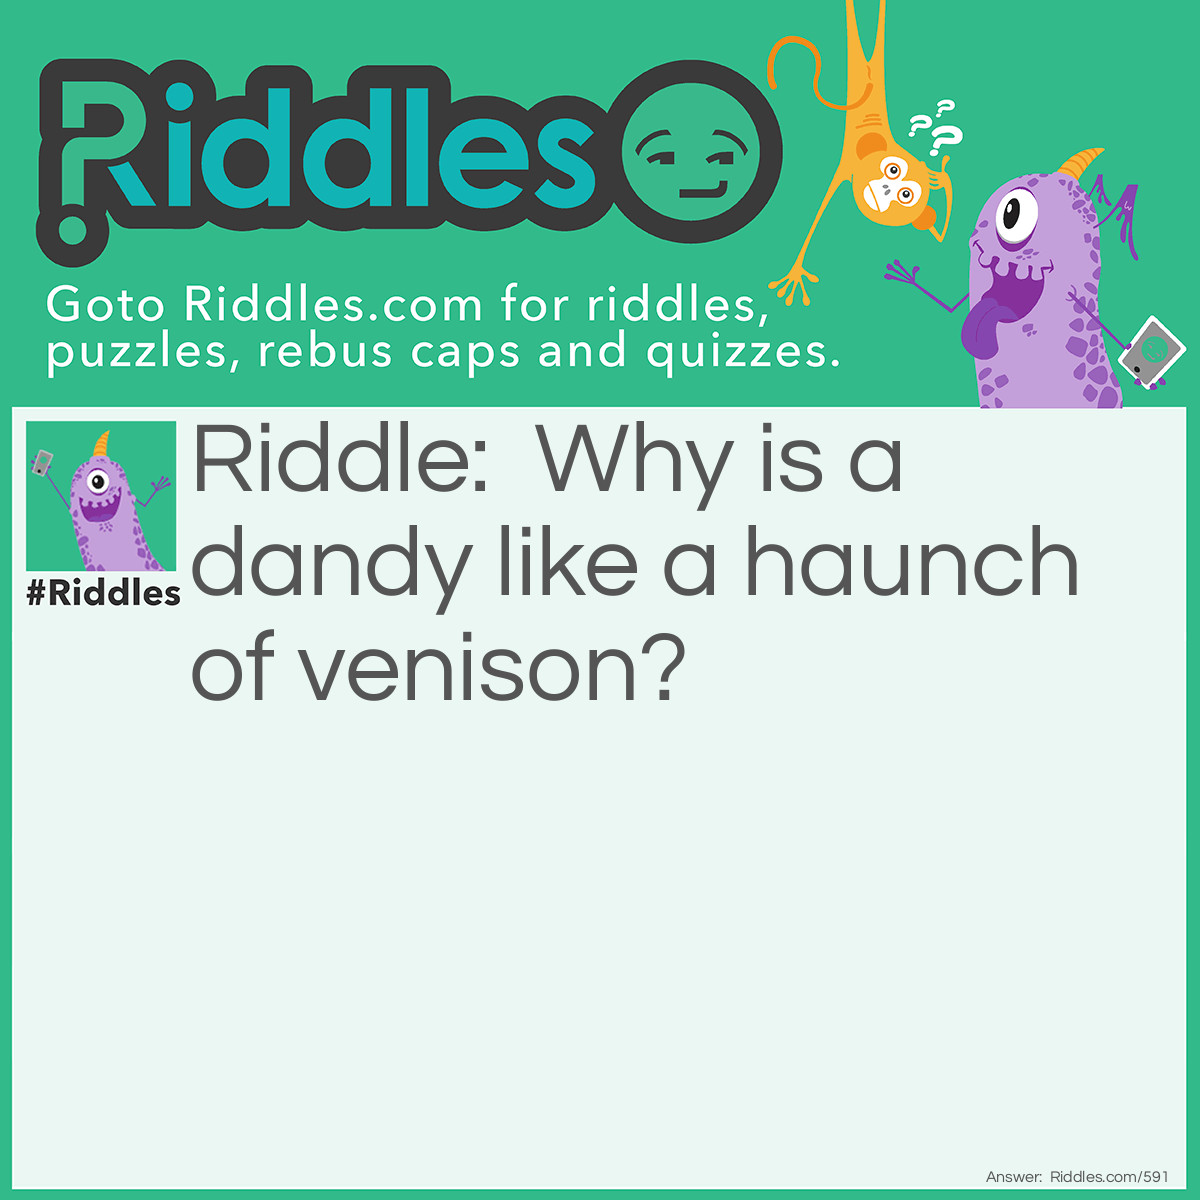 Riddle: Why is a dandy like a haunch of venison? Answer: He is a bit of a buck.